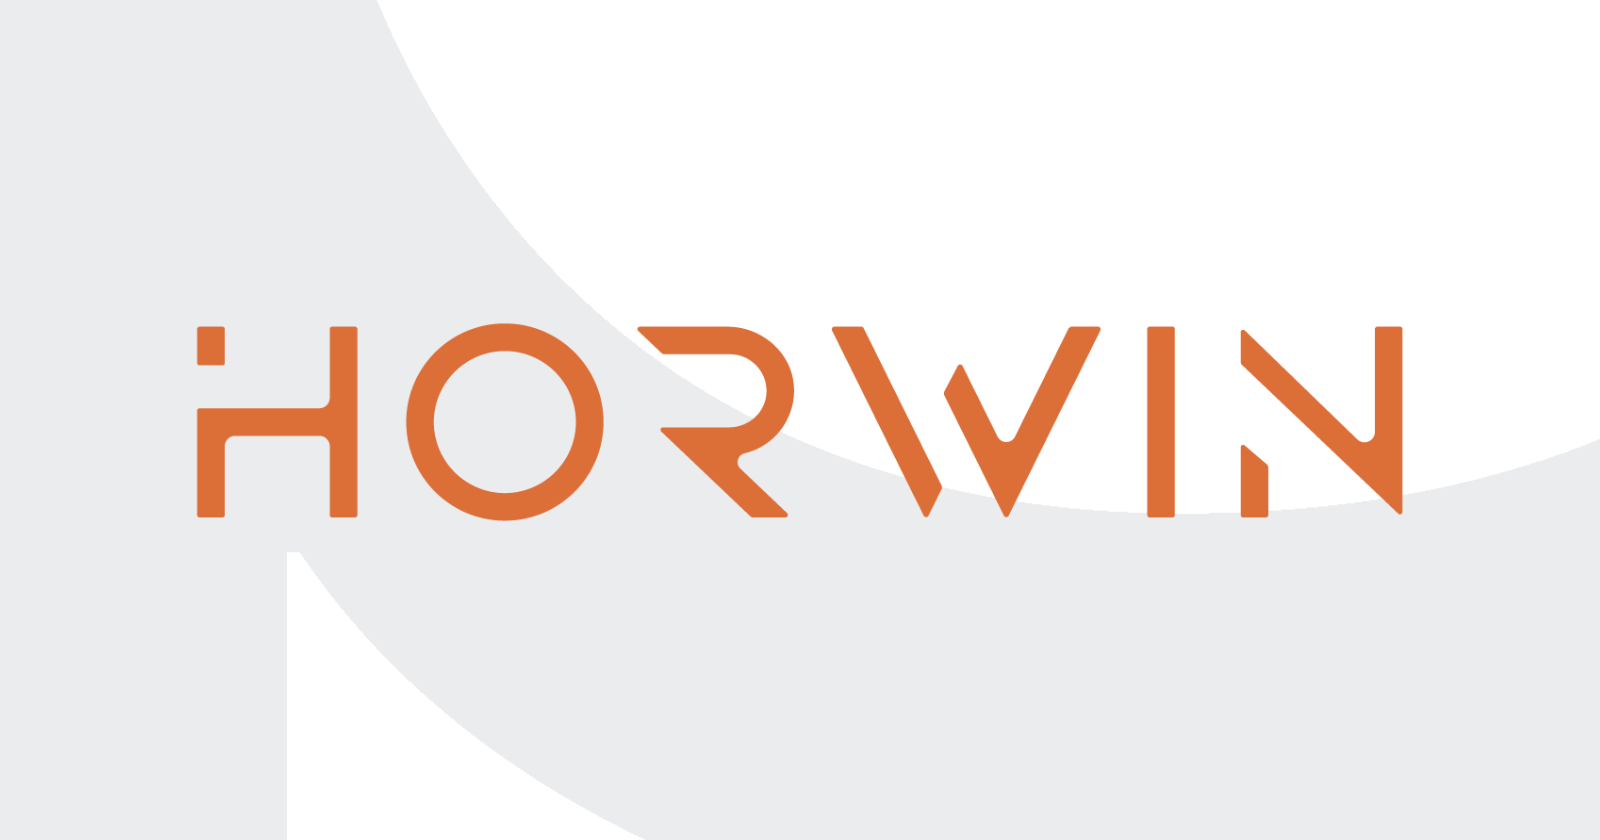 Orange and grey abstract logo design on a white background